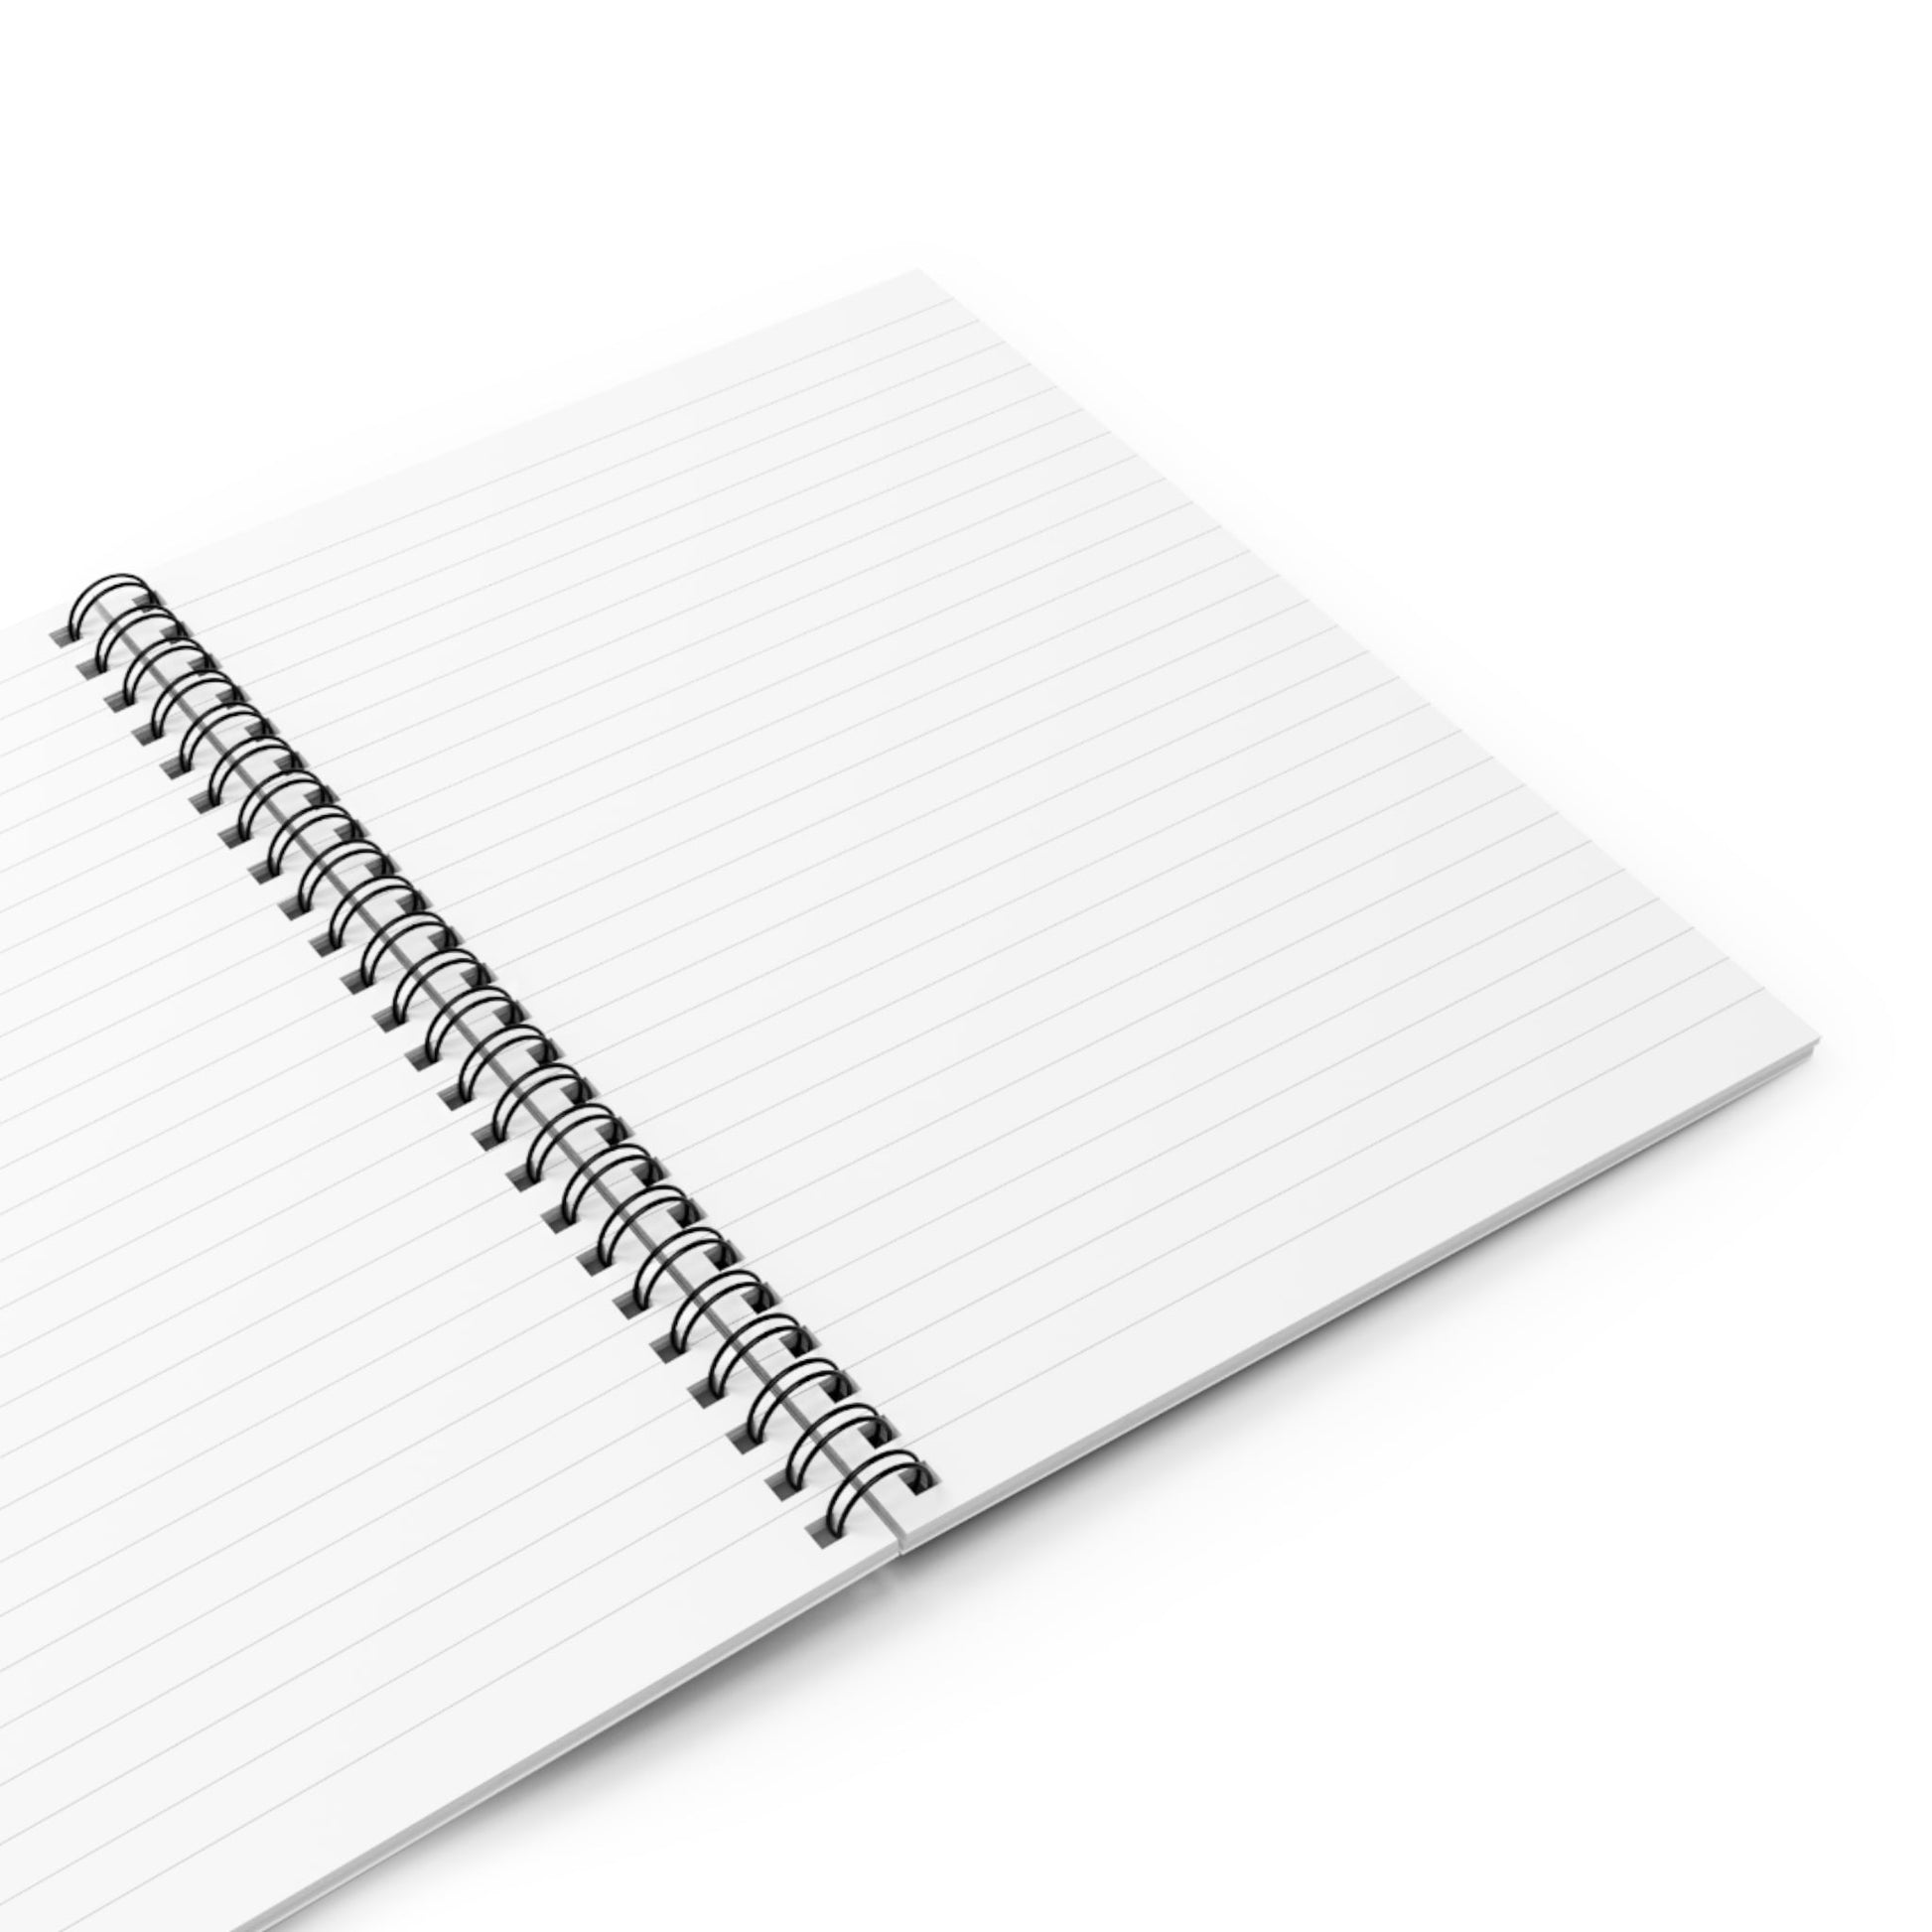 Spiral Notebook with Vegetarian Cover Opened with Blank White College Ruled Pages